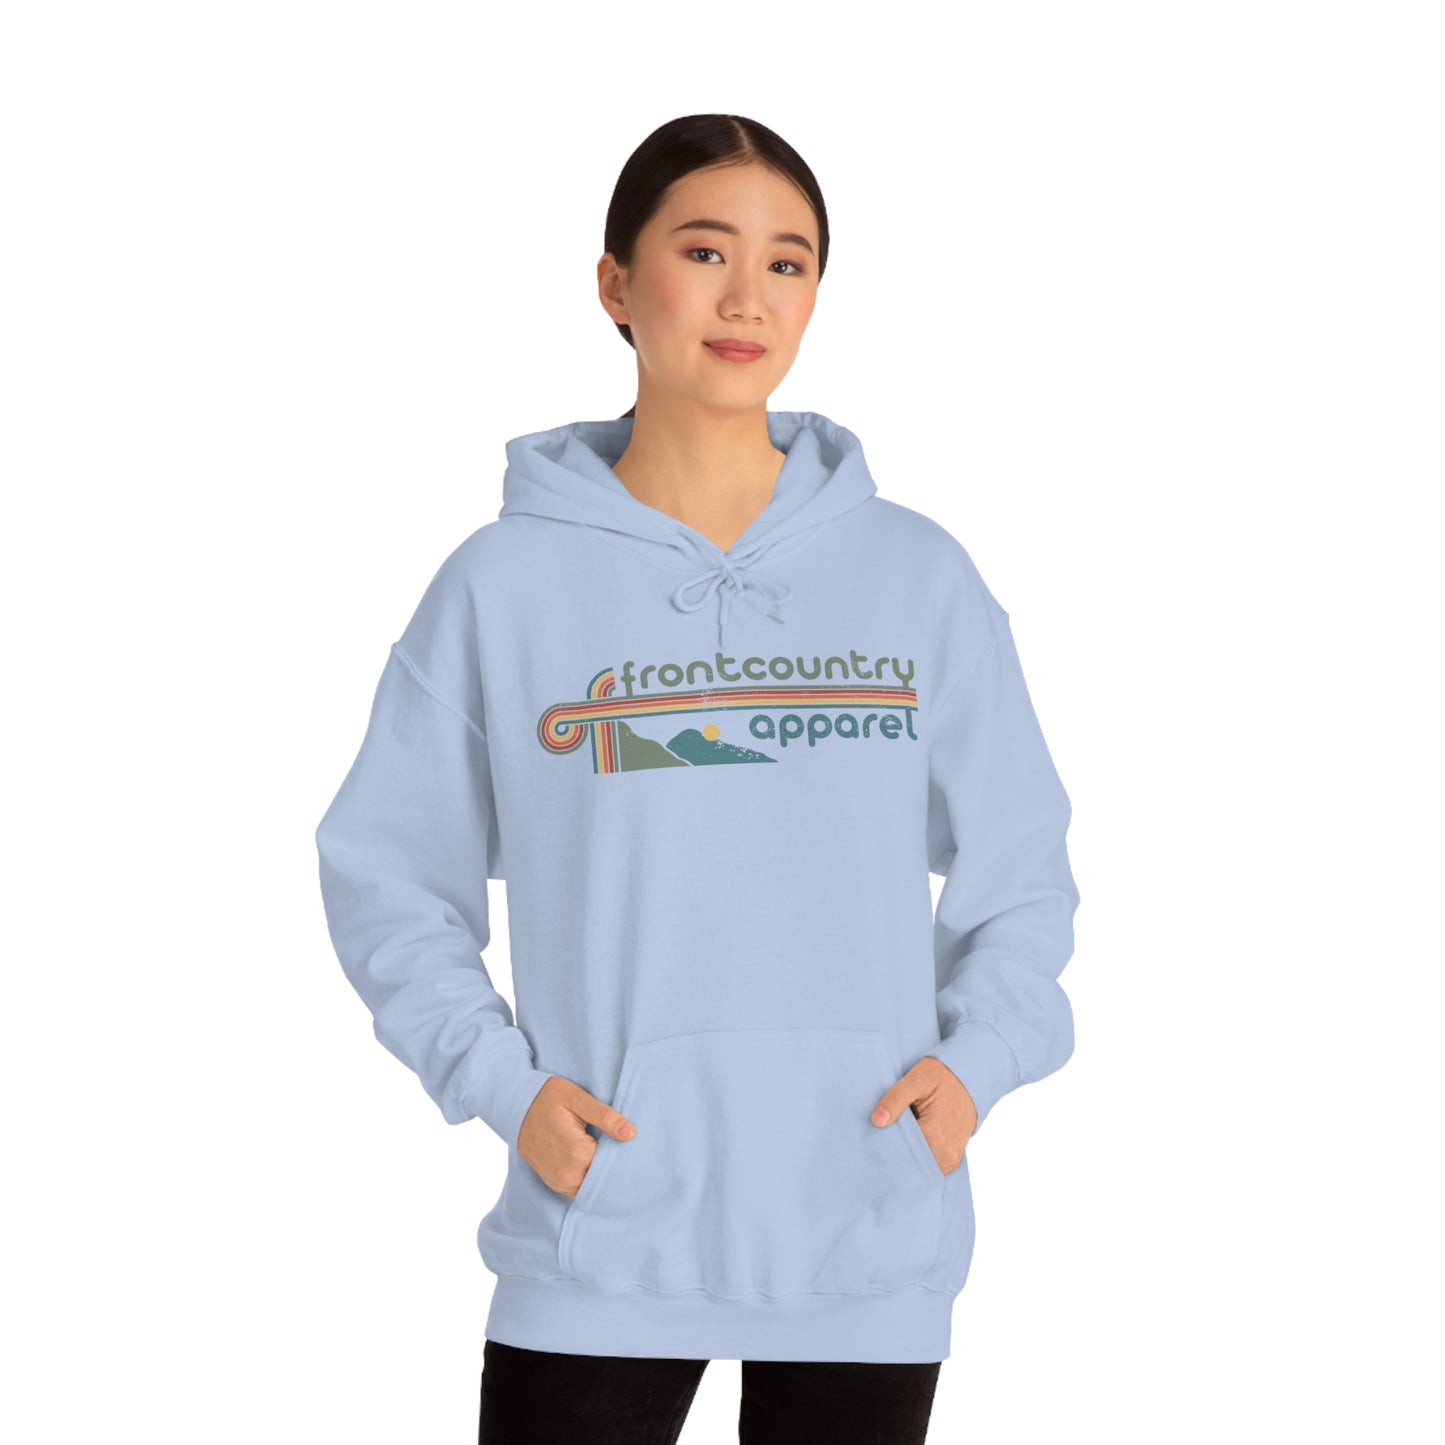 Frontcountry Hoodie